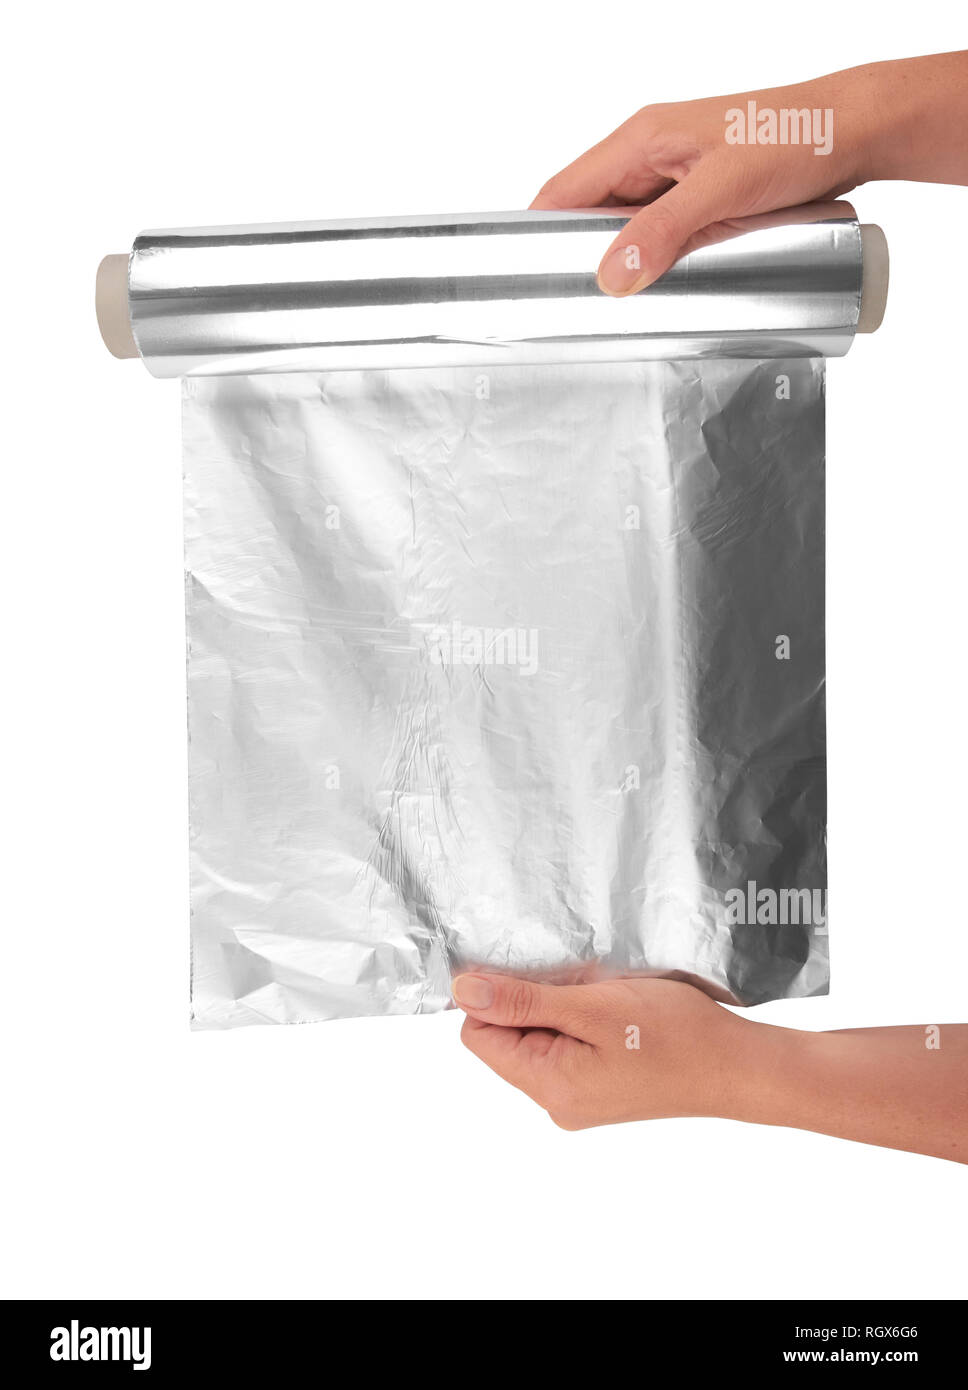 woman holding a roll of aluminum foil Stock Photo